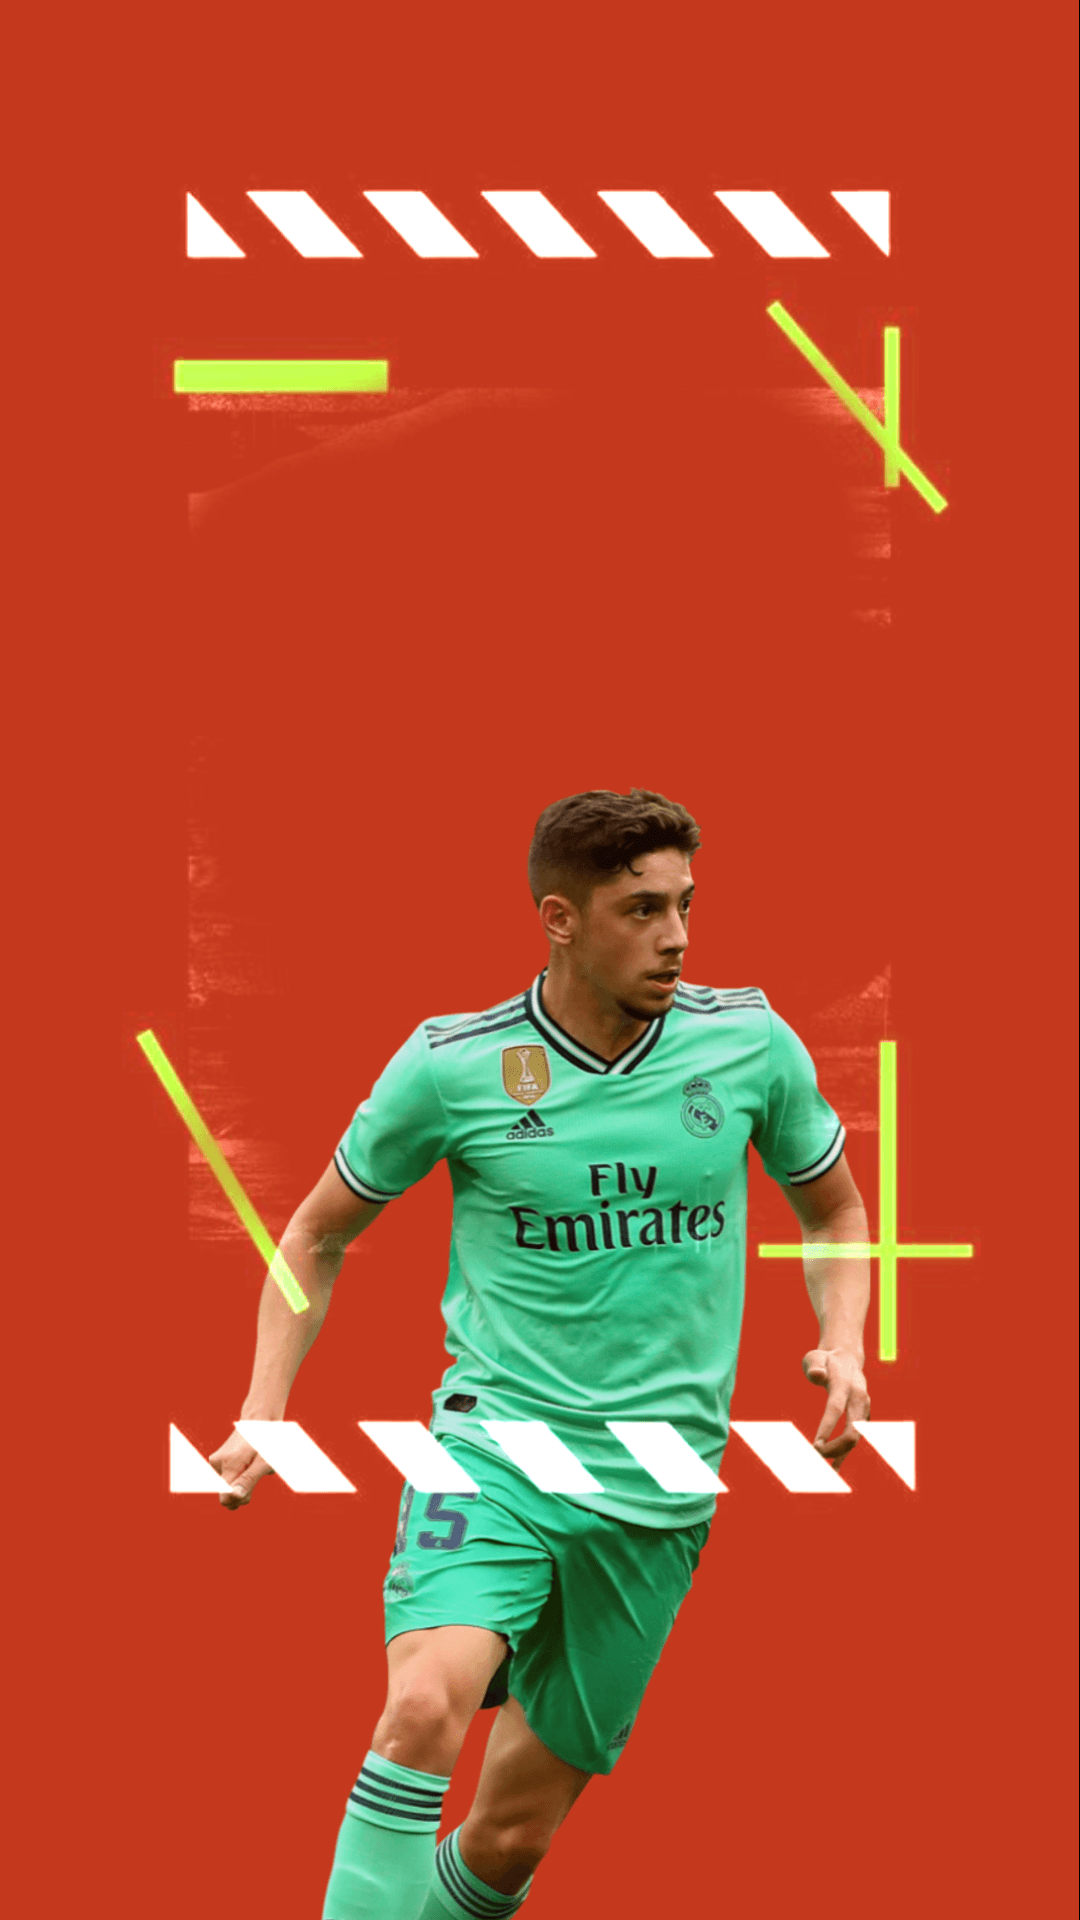 This wallpaper i made for fede before the game, and he did